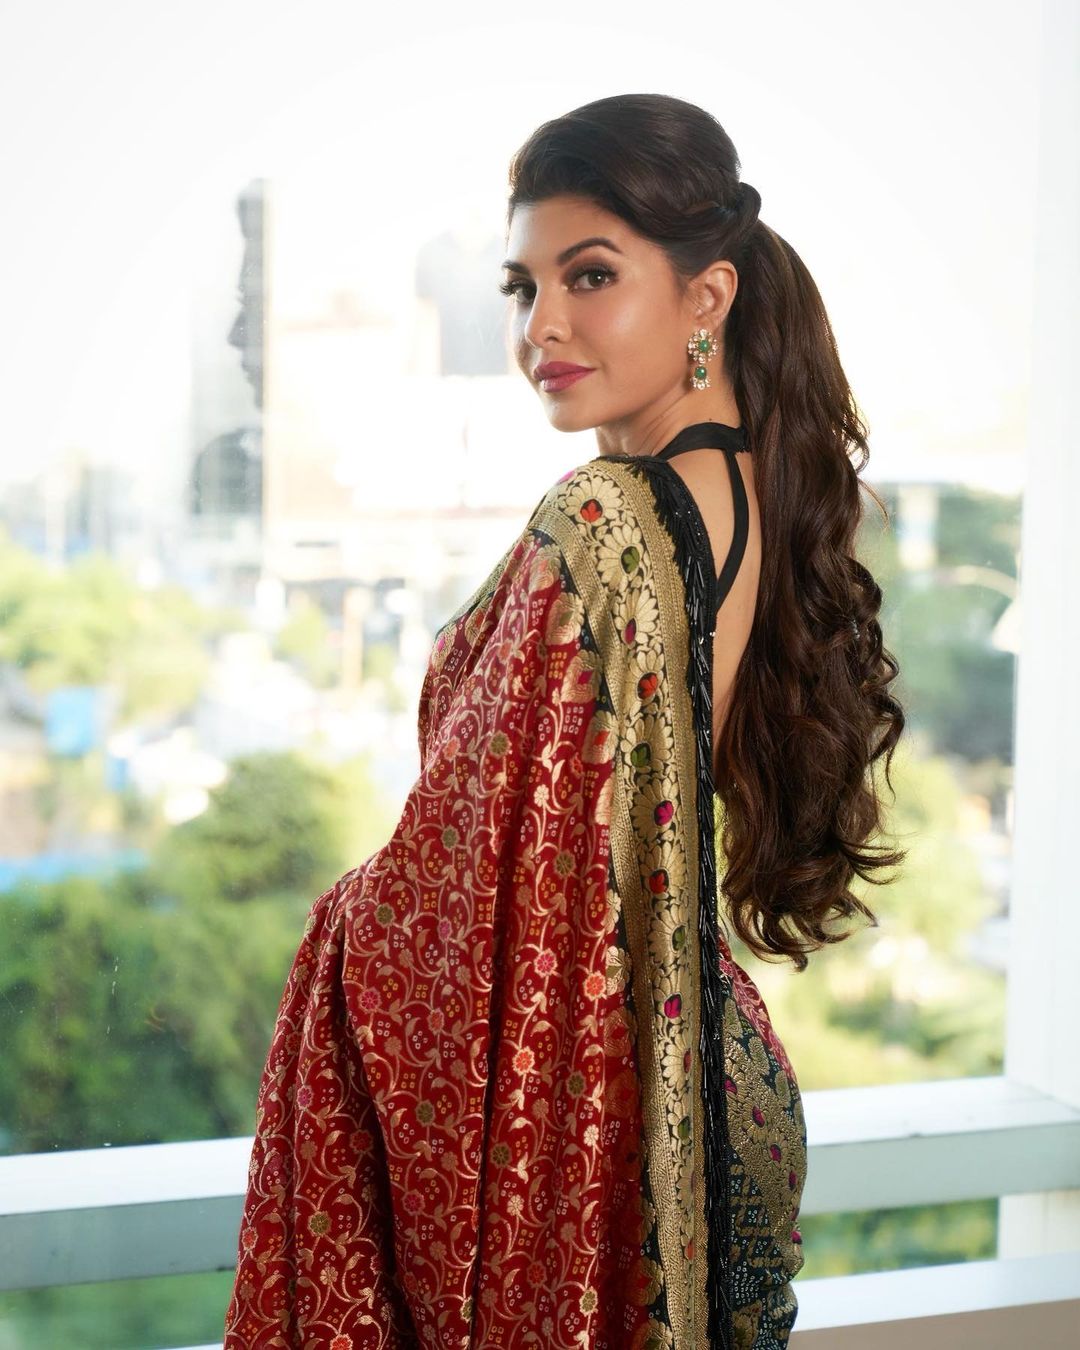 Jacqueline Fernandez looks graceful in the red and golden saree.